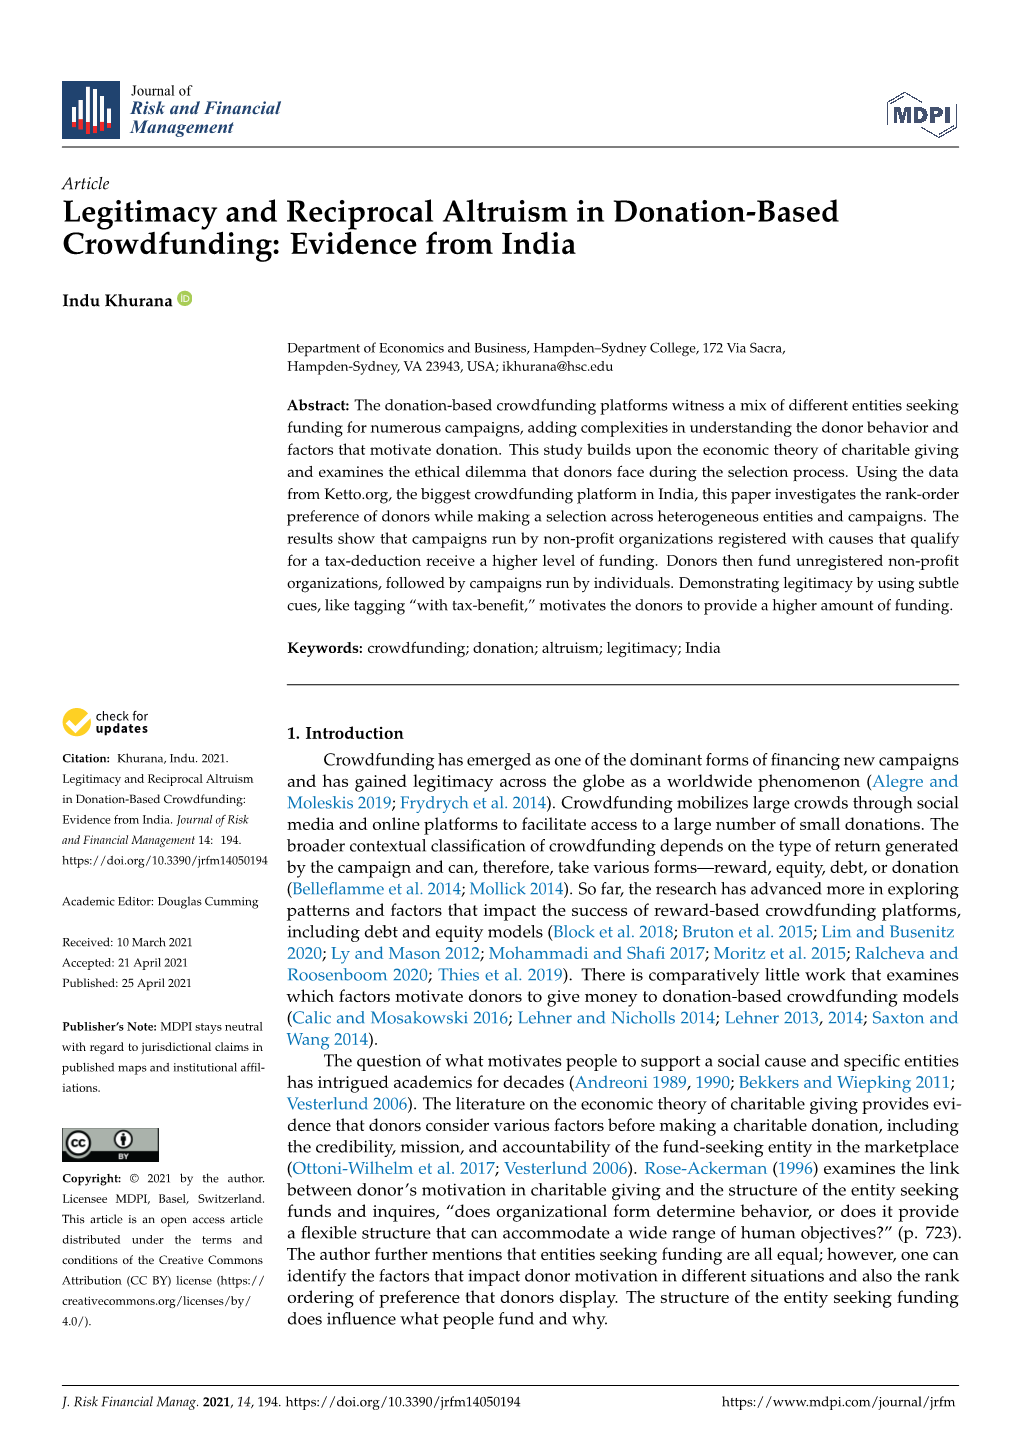 Legitimacy and Reciprocal Altruism in Donation-Based Crowdfunding: Evidence from India